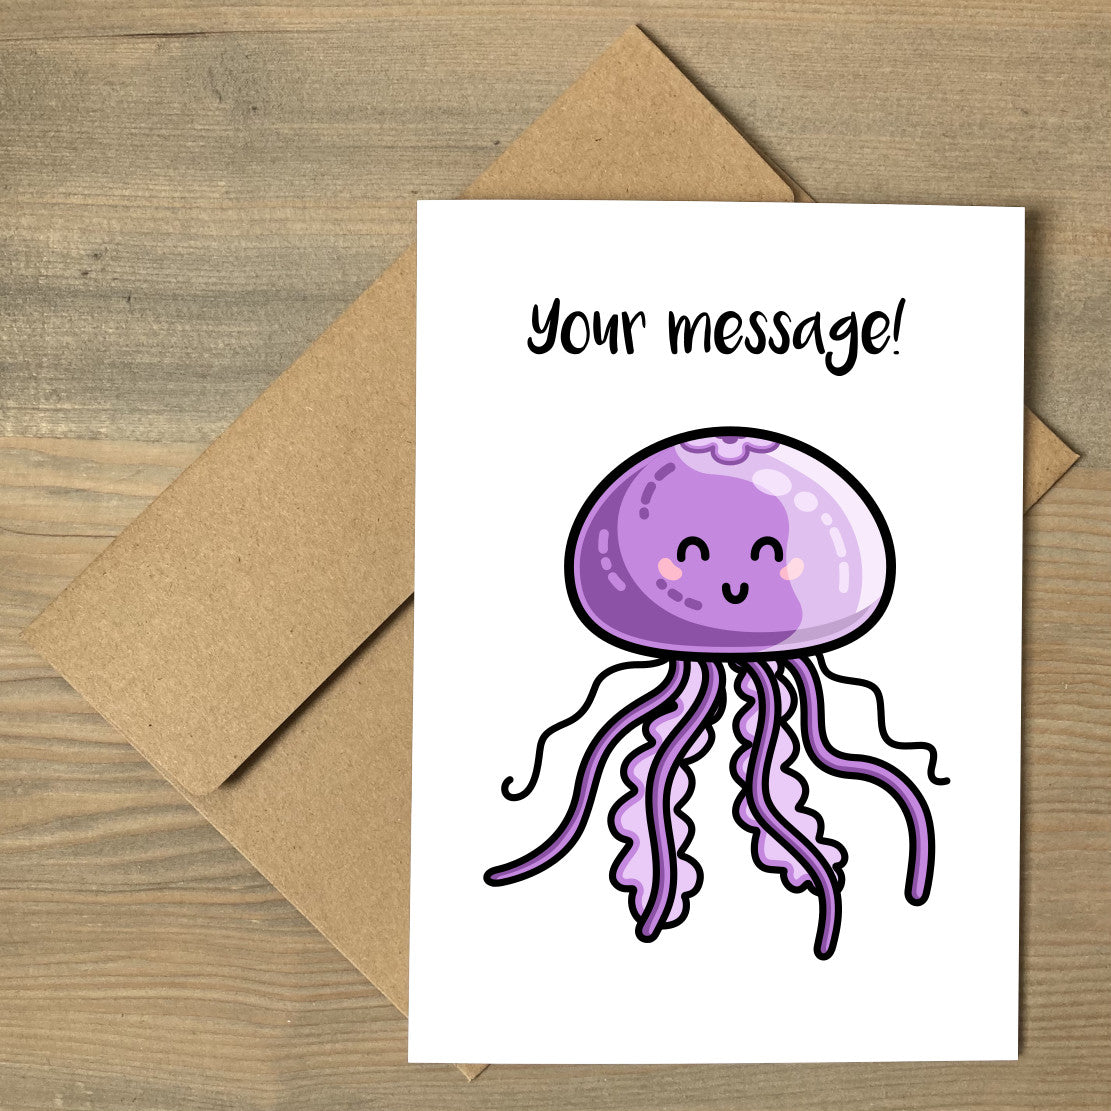 A white greeting card lying flat on a brown envelope, with a design of a kawaii cute purple jellyfish with a personalised message above